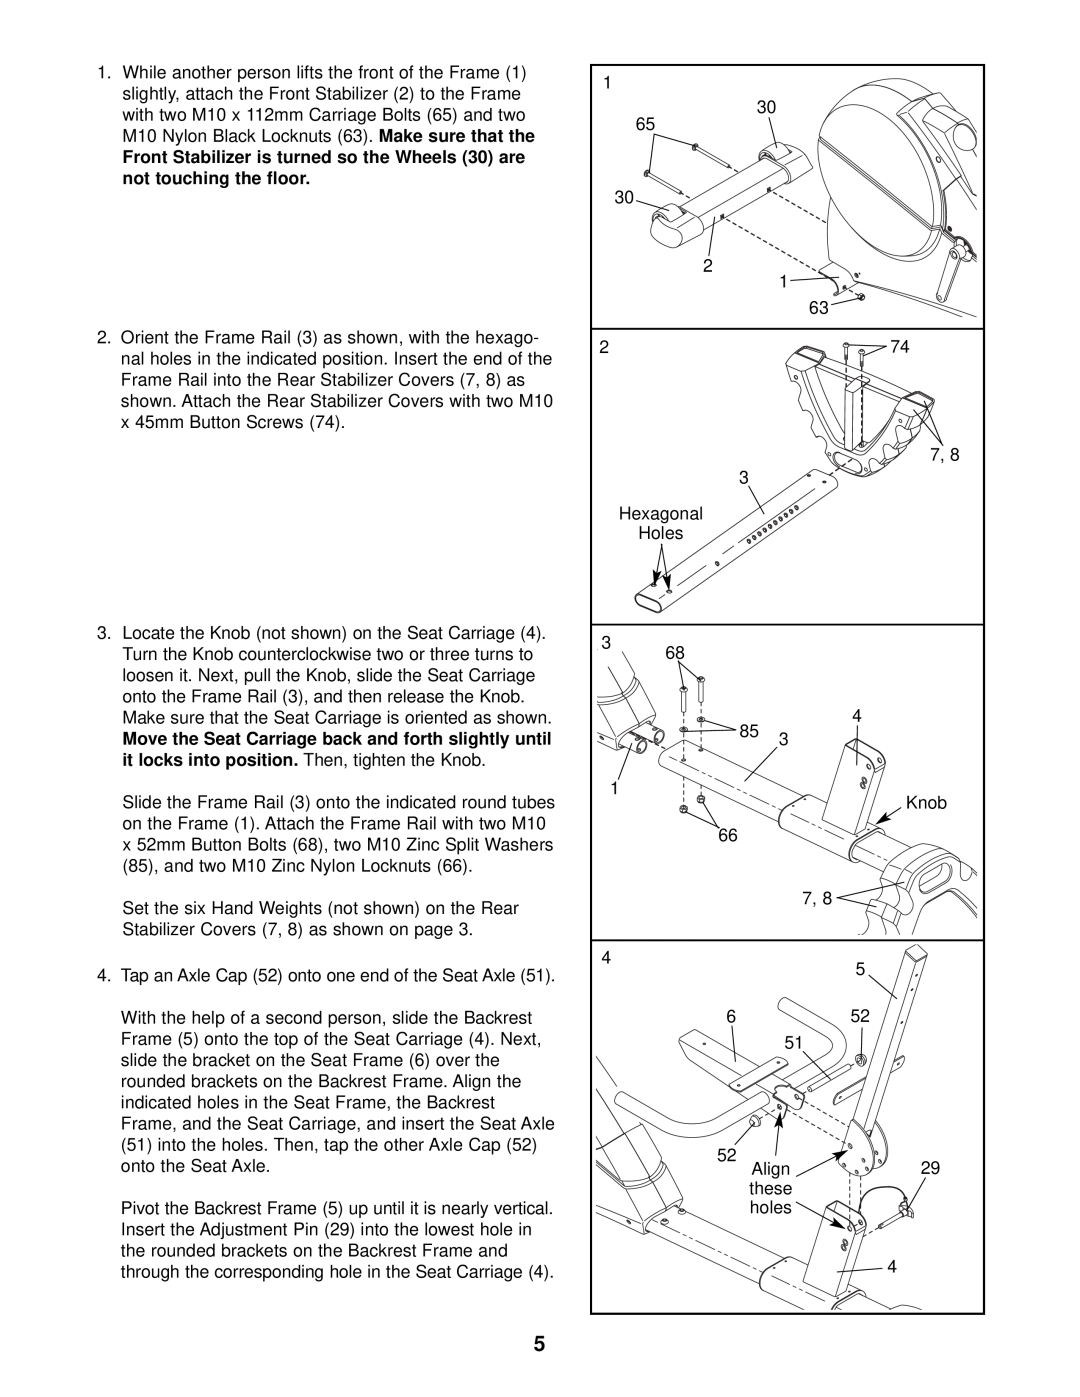 ProForm PFEX39910 user manual Tap an Axle Cap 52 onto one end of the Seat Axle 